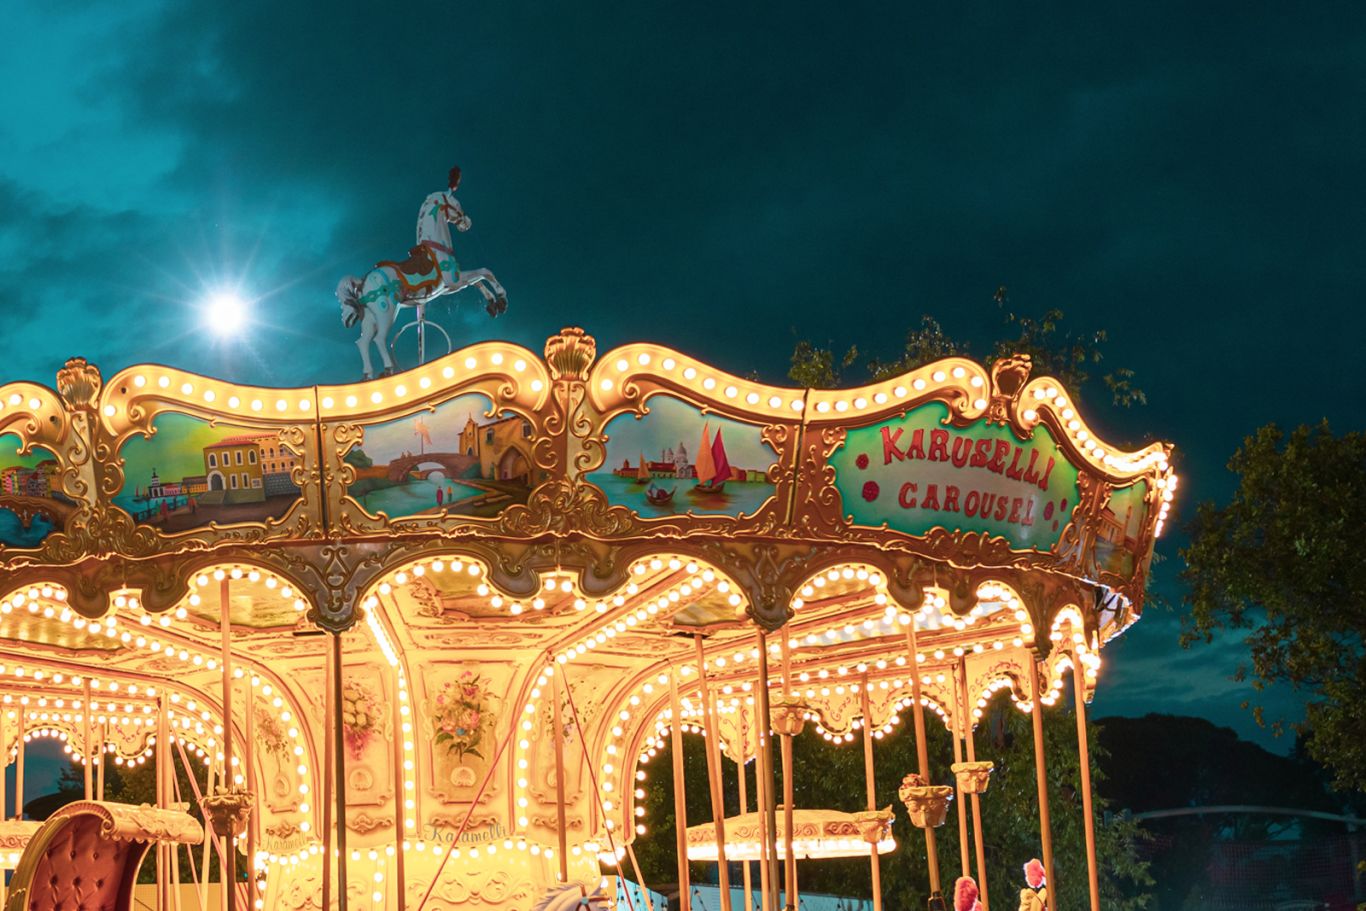 Candy Carousel in the evening